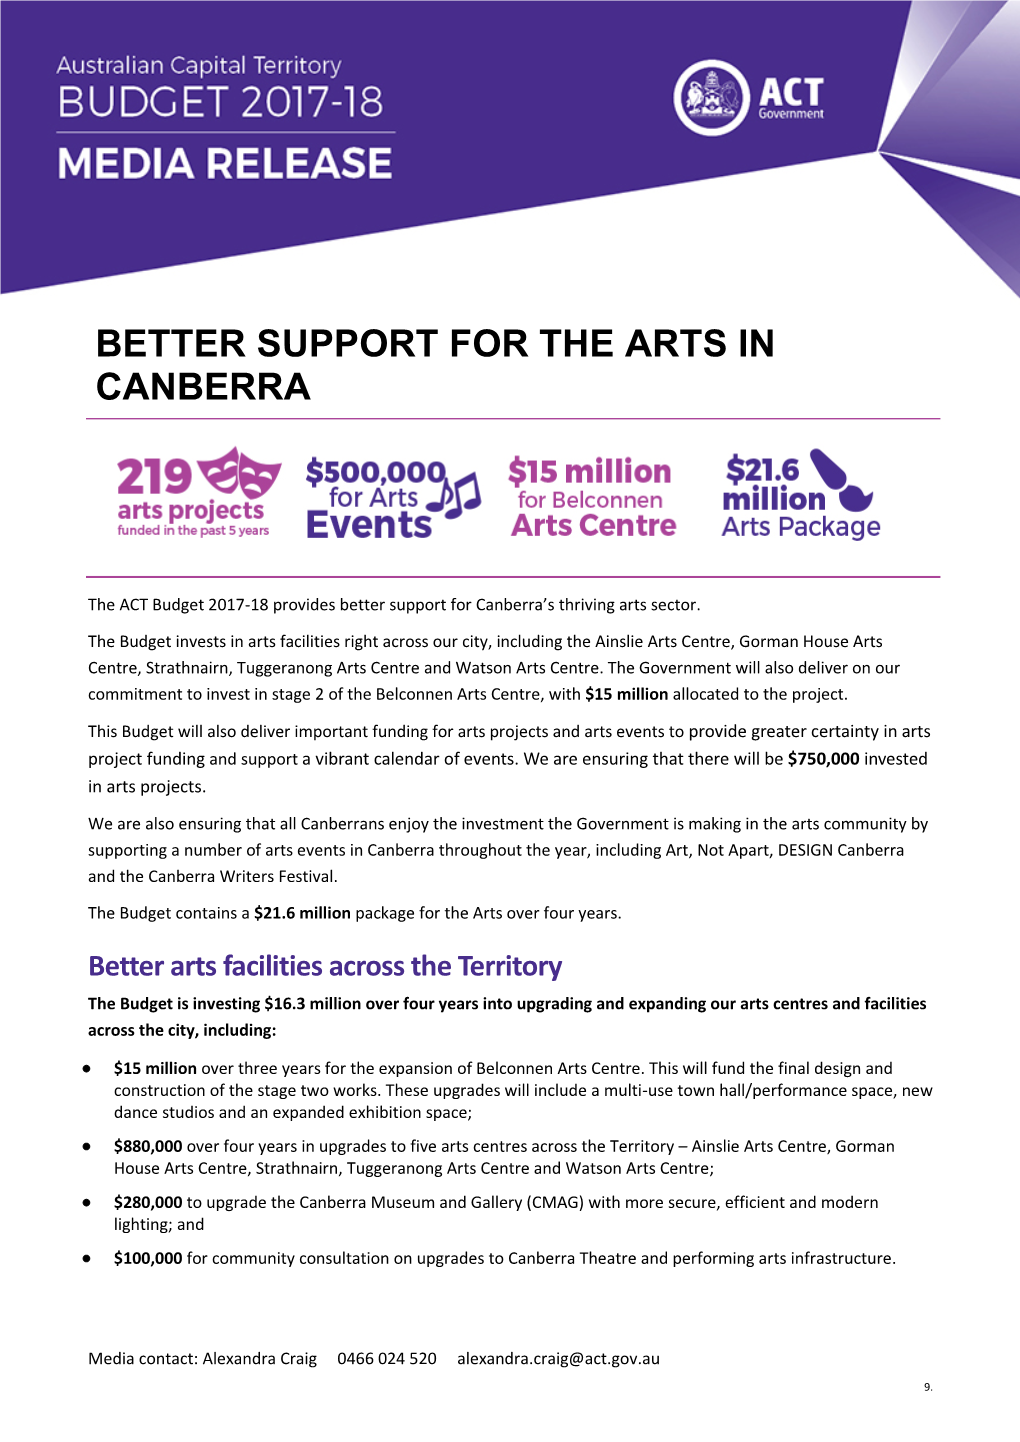 Better Support for the Arts in Canberra